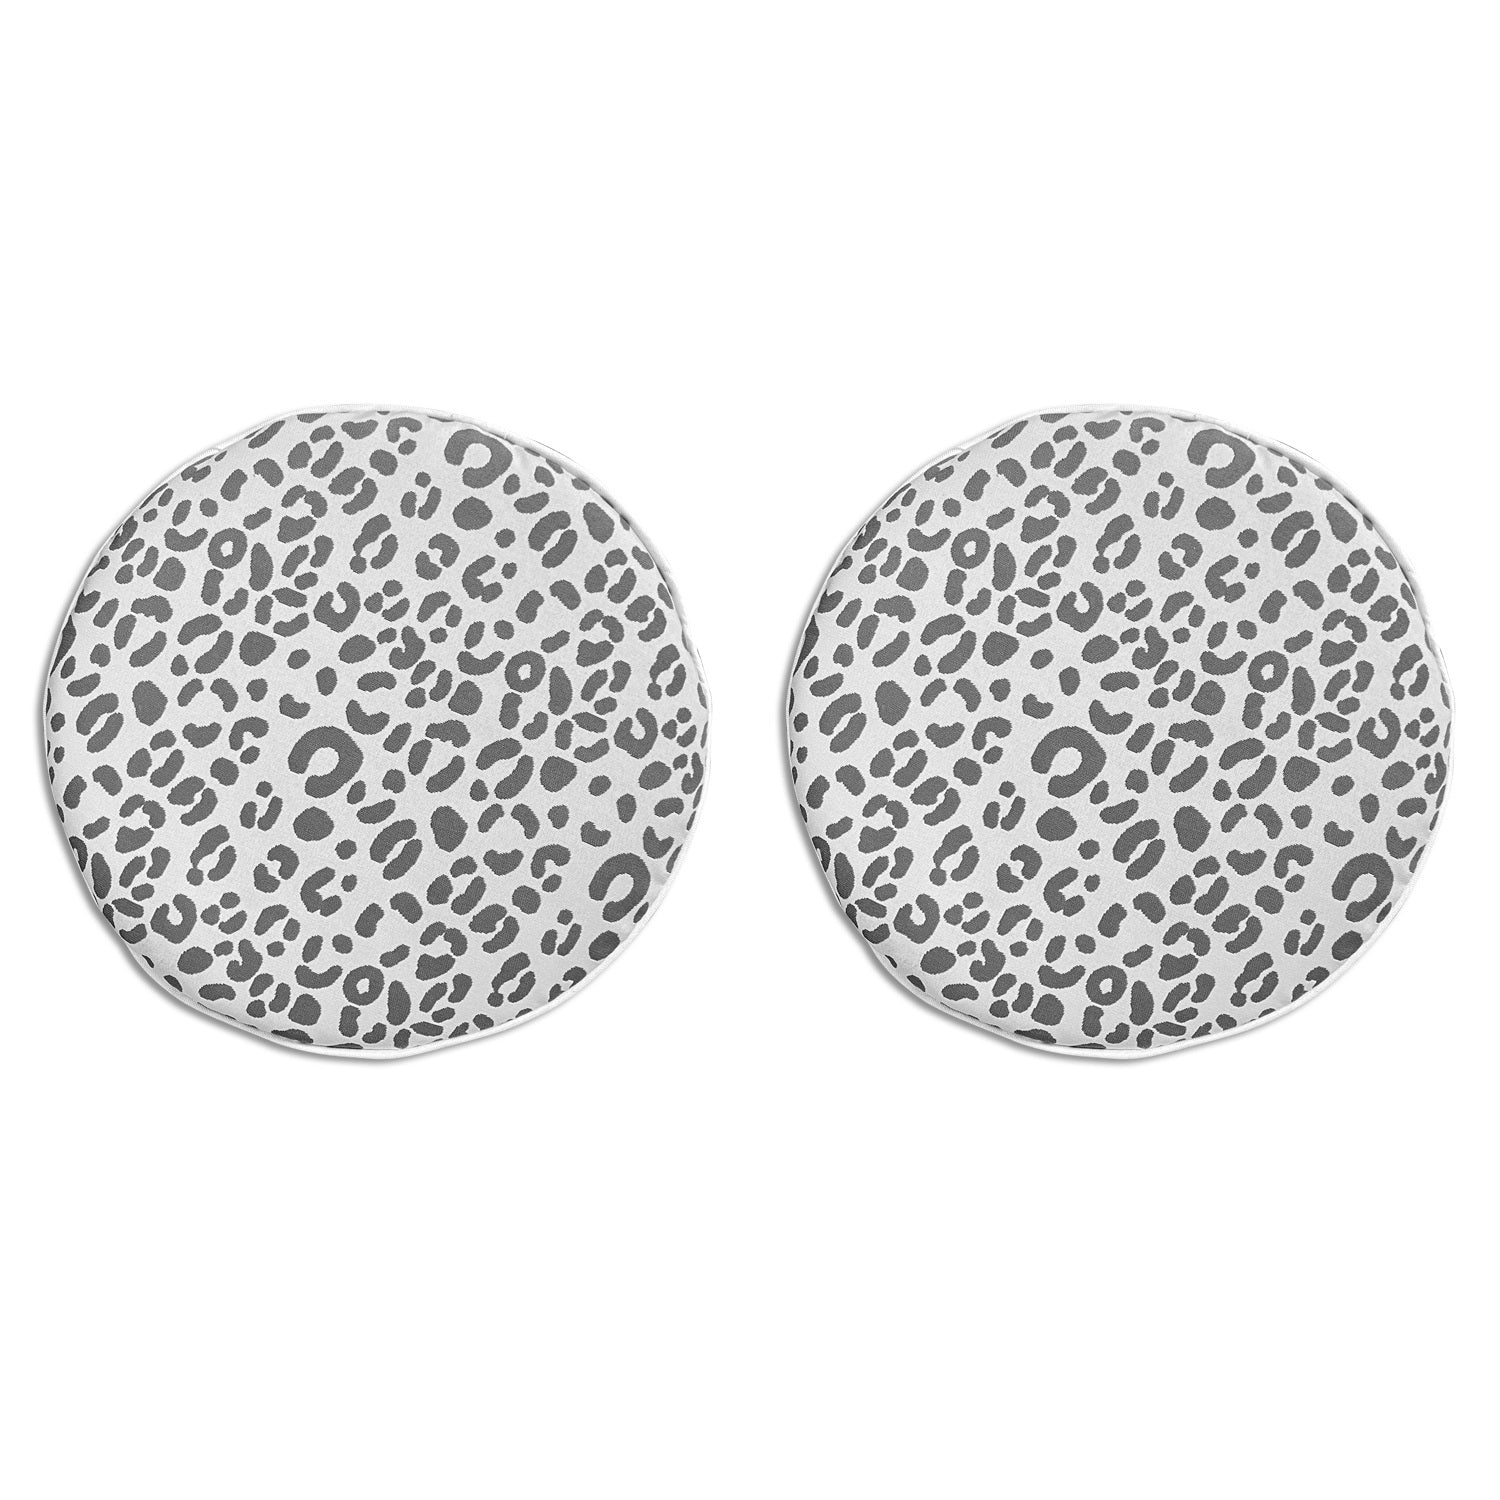 Outdoor Chair Pads Set of 2 Gray Leopard Round Patio Chair Cushions